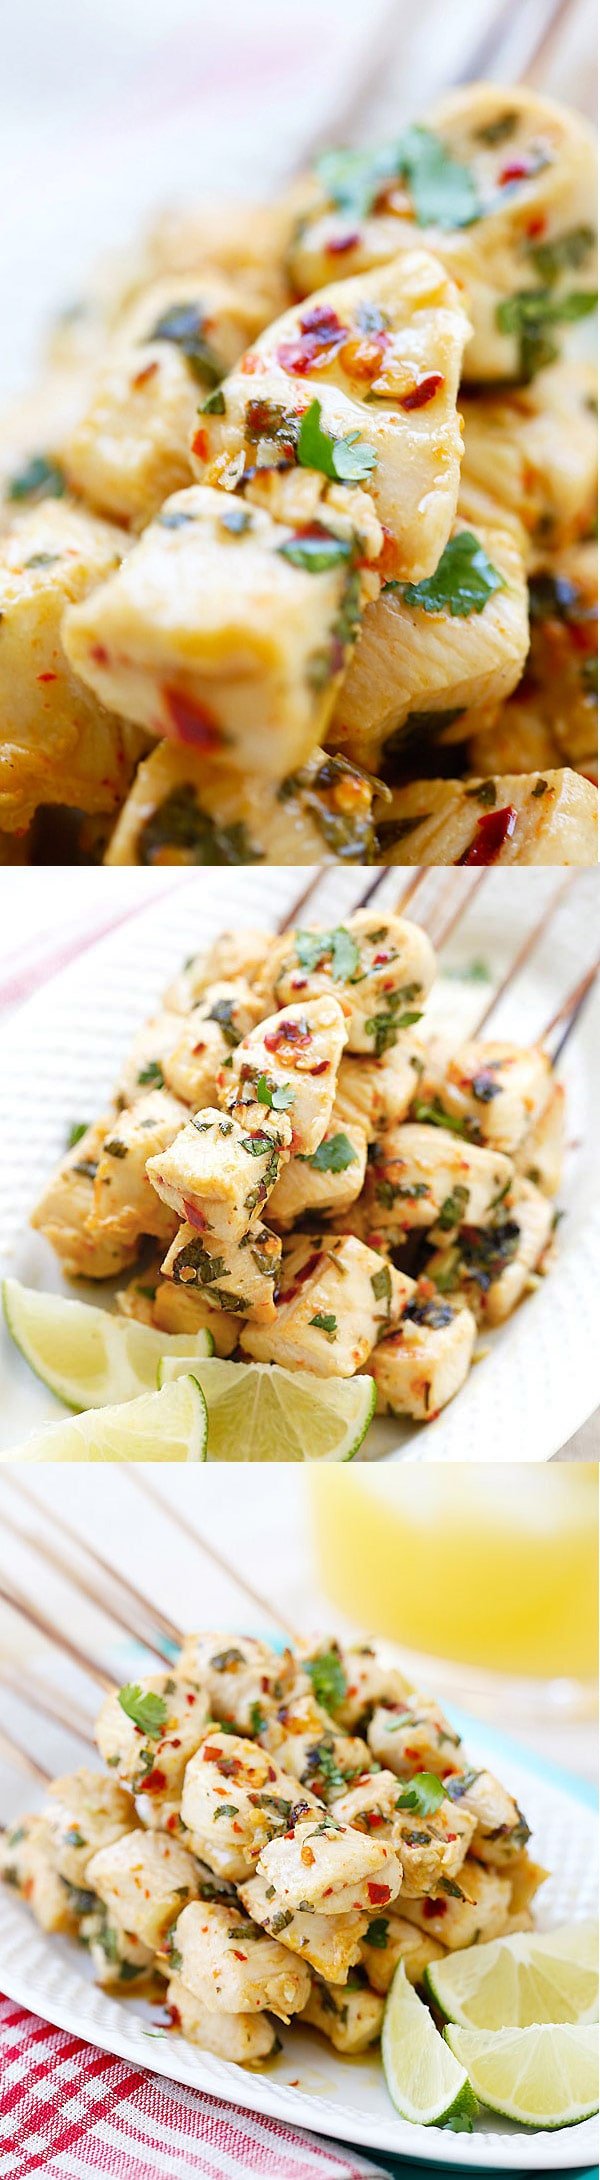 Cilantro Lime Chicken Kebab - juicy chicken kebab marinated with cilantro, lime juice and garlic. The easiest and best chicken kebab recipe ever! | rasamalaysia.com